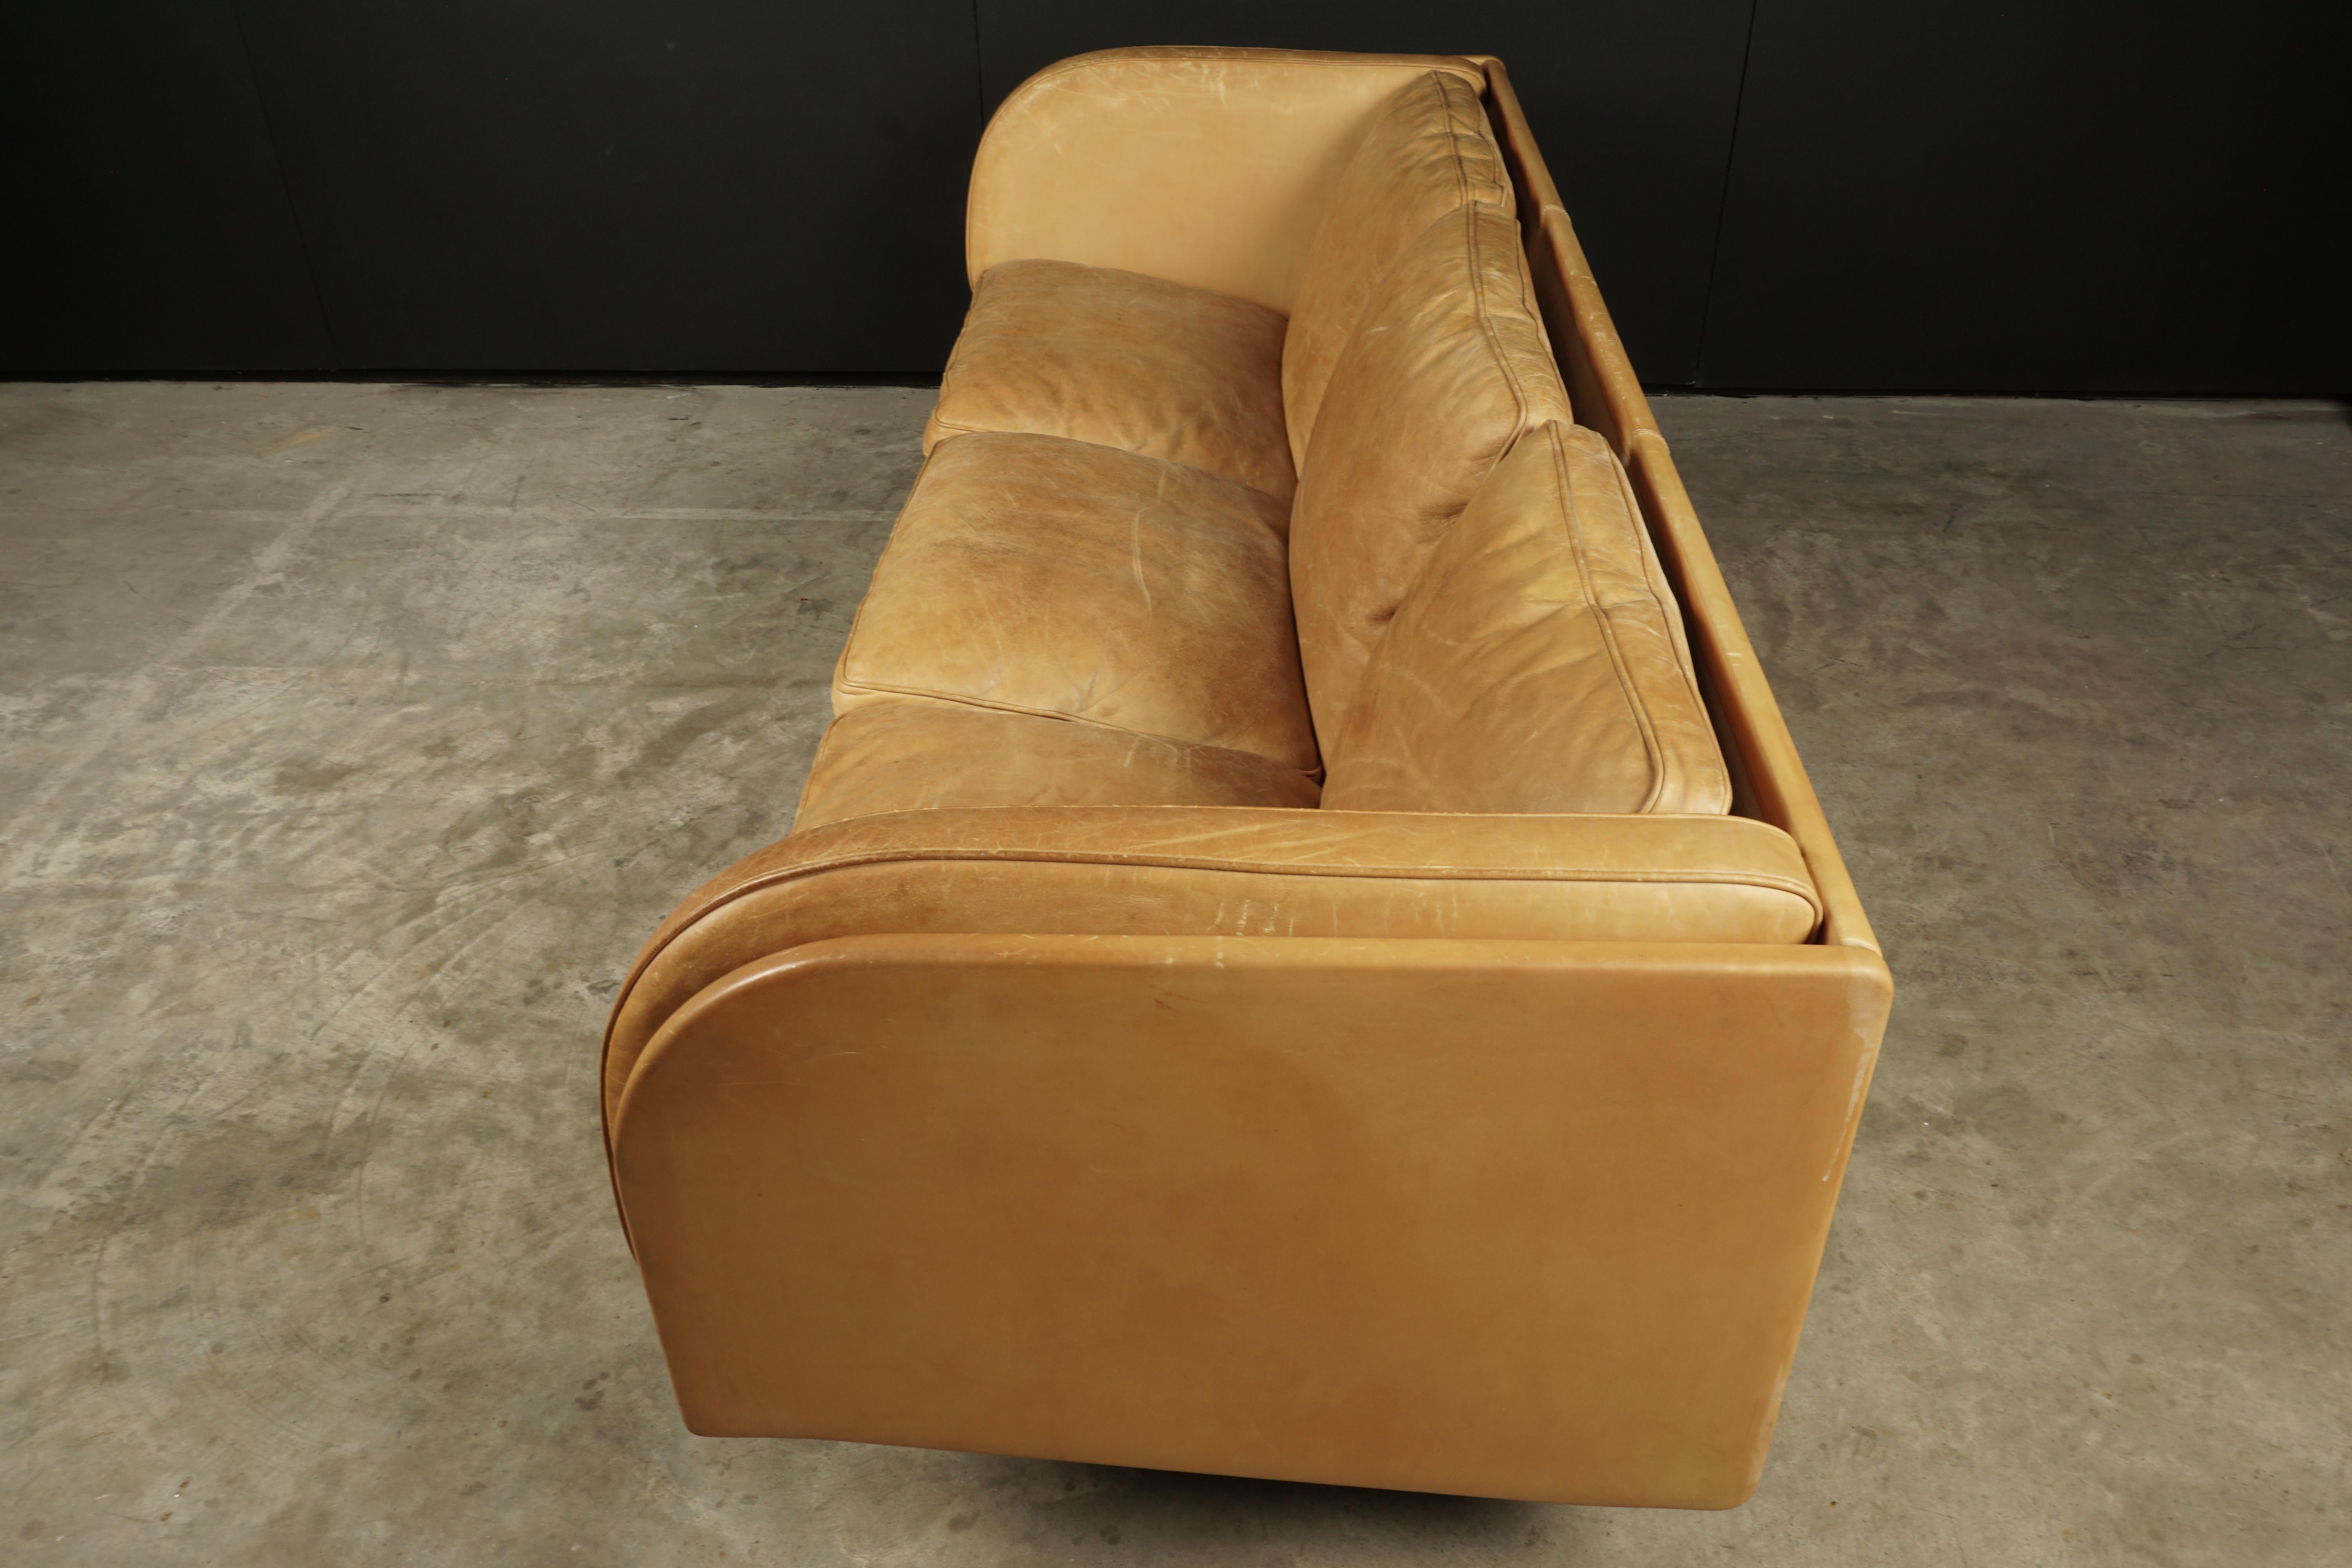 Vintage cognac leather sofa designed by Jørgen Gammelgaard, Denmark, circa 1980. Original leather upholstery with fantastic color and patina.